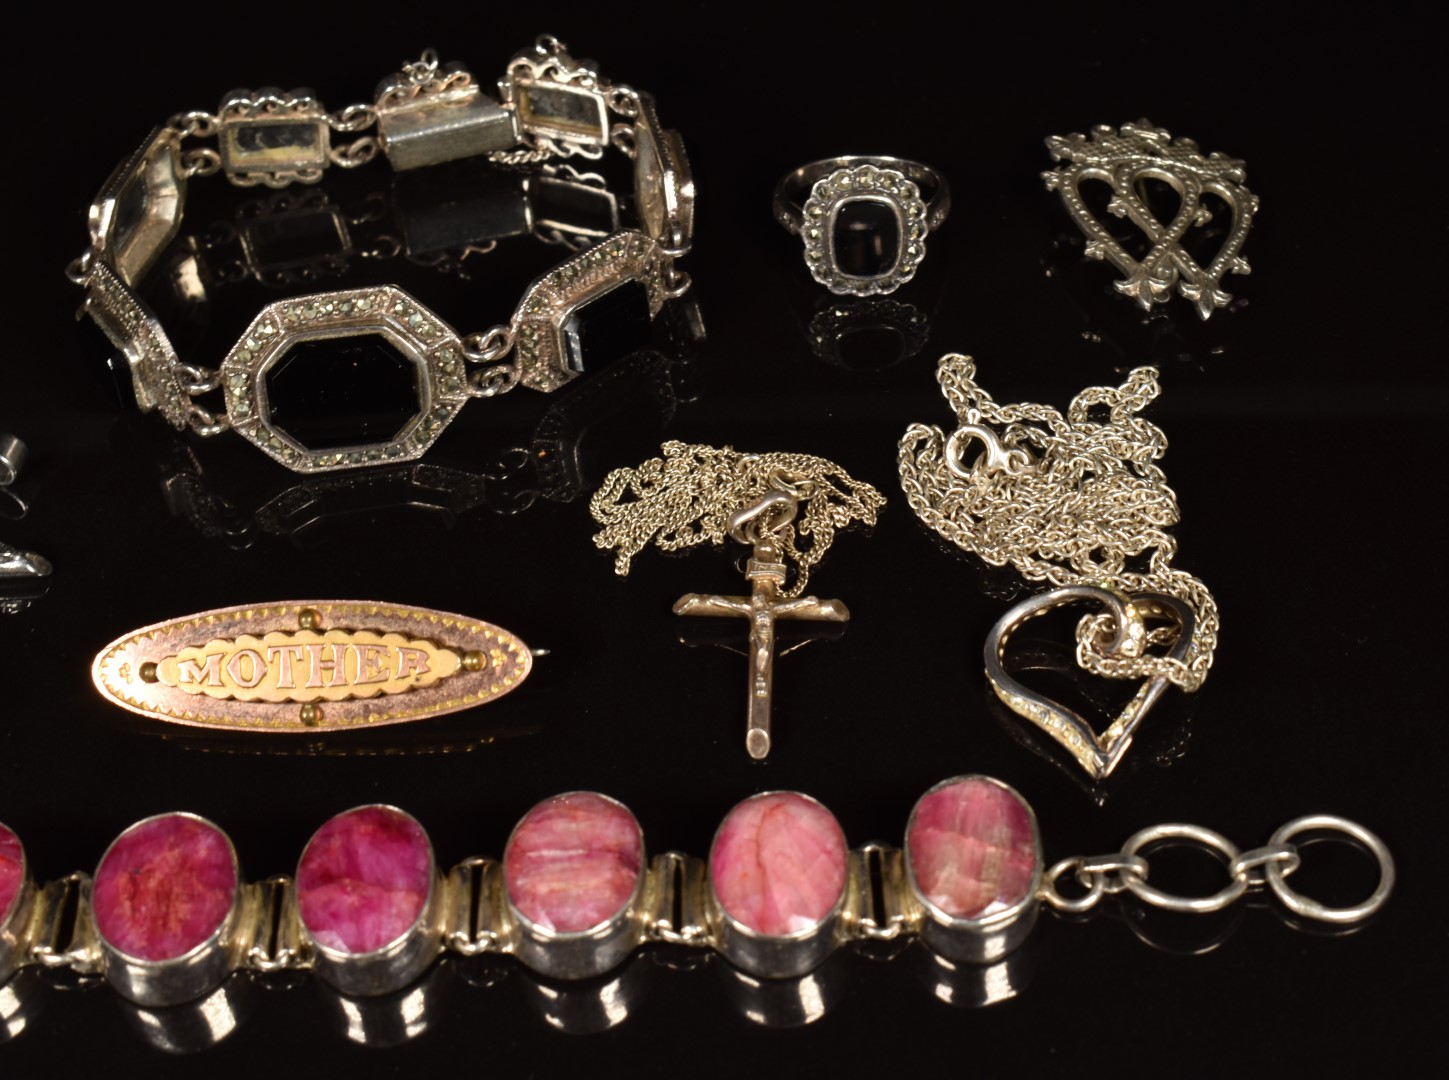 A silver bracelet set with rubies, a silver bracelet set with onyx, silver pendants and chains, - Image 3 of 3